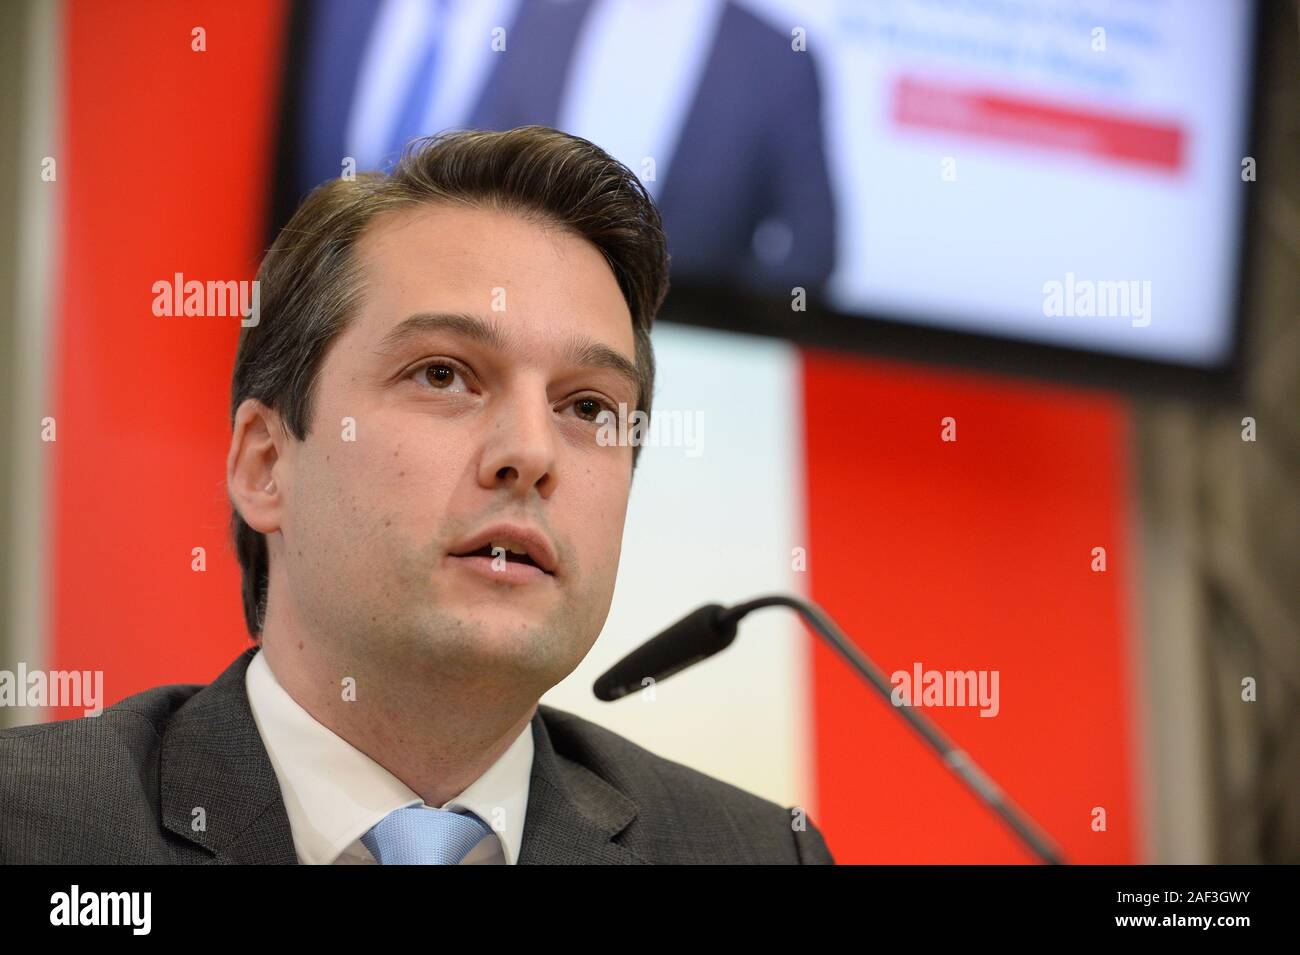 Vienna, 12th December, 2019.  The Vienna Freedom Party Austria (FPÖ) Dominik Nepp gives a press conference about the split-off of three FPÖ mandataries and the re-founding of the "Alliance for Austria (ADÖ)". Credit: Franz Perc / Alamy Live News Stock Photo